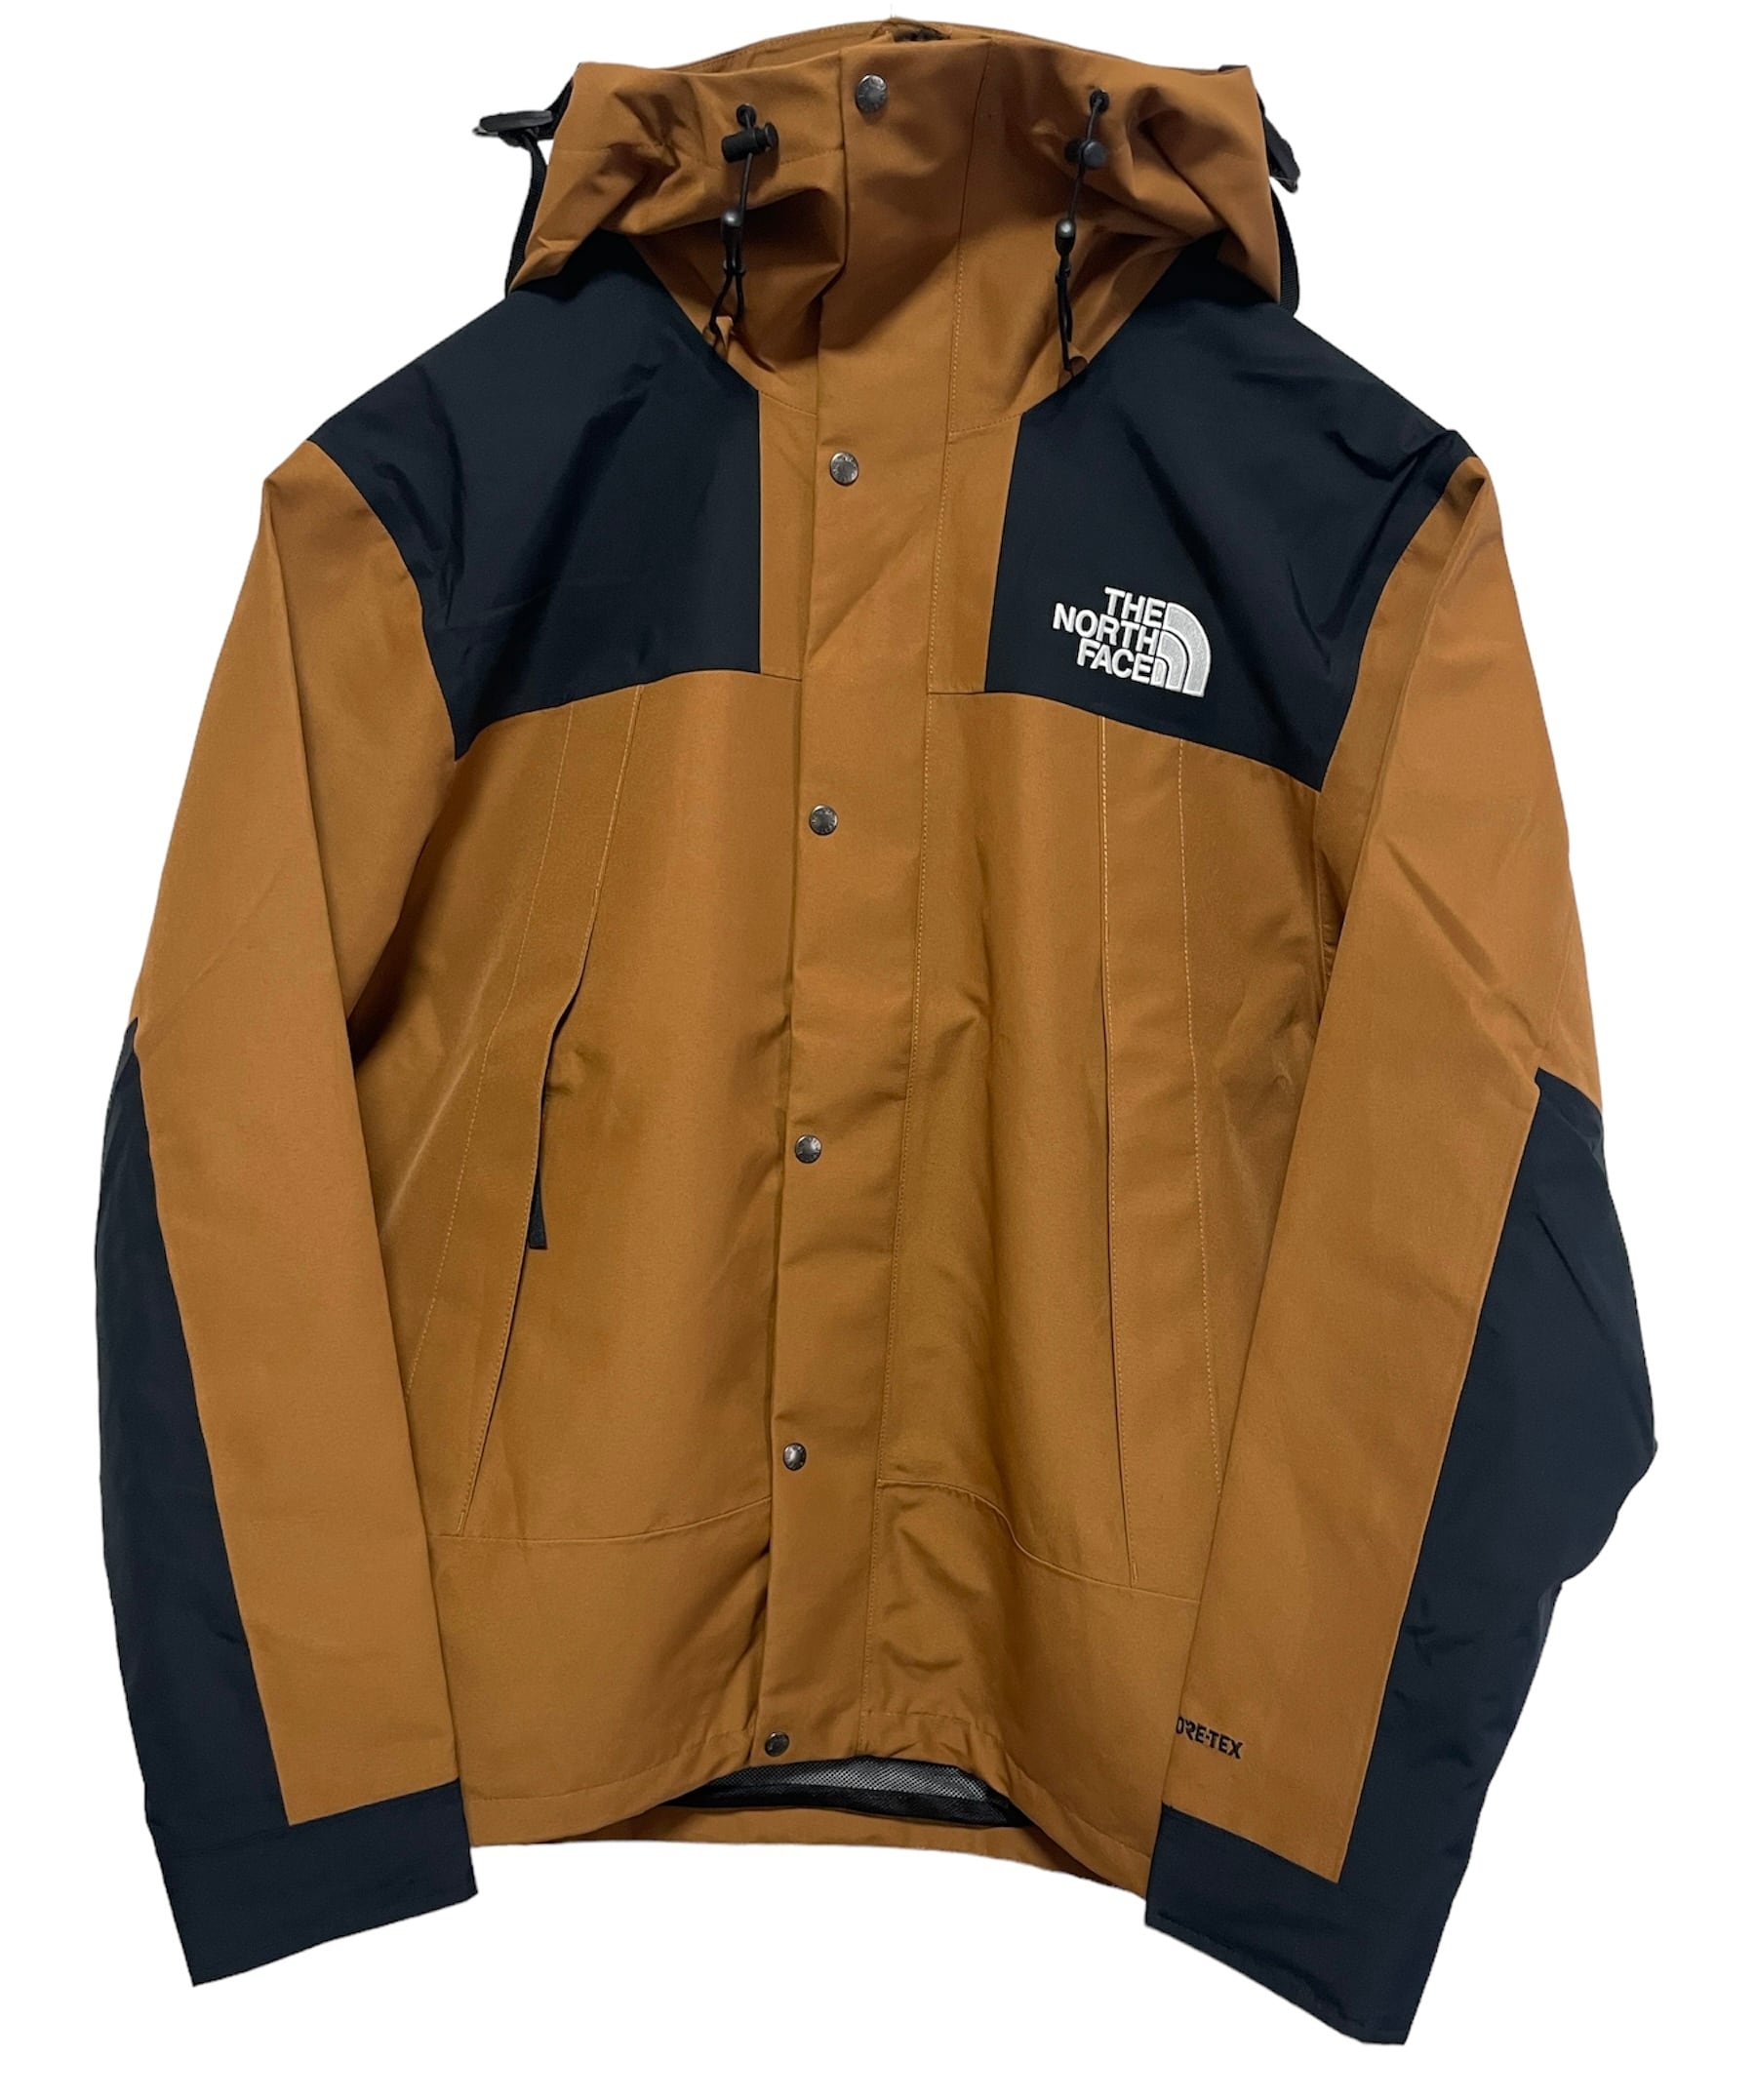 THE NORTH FACE - gore-tex 1990 mountain jacket (SIZE: XL ...